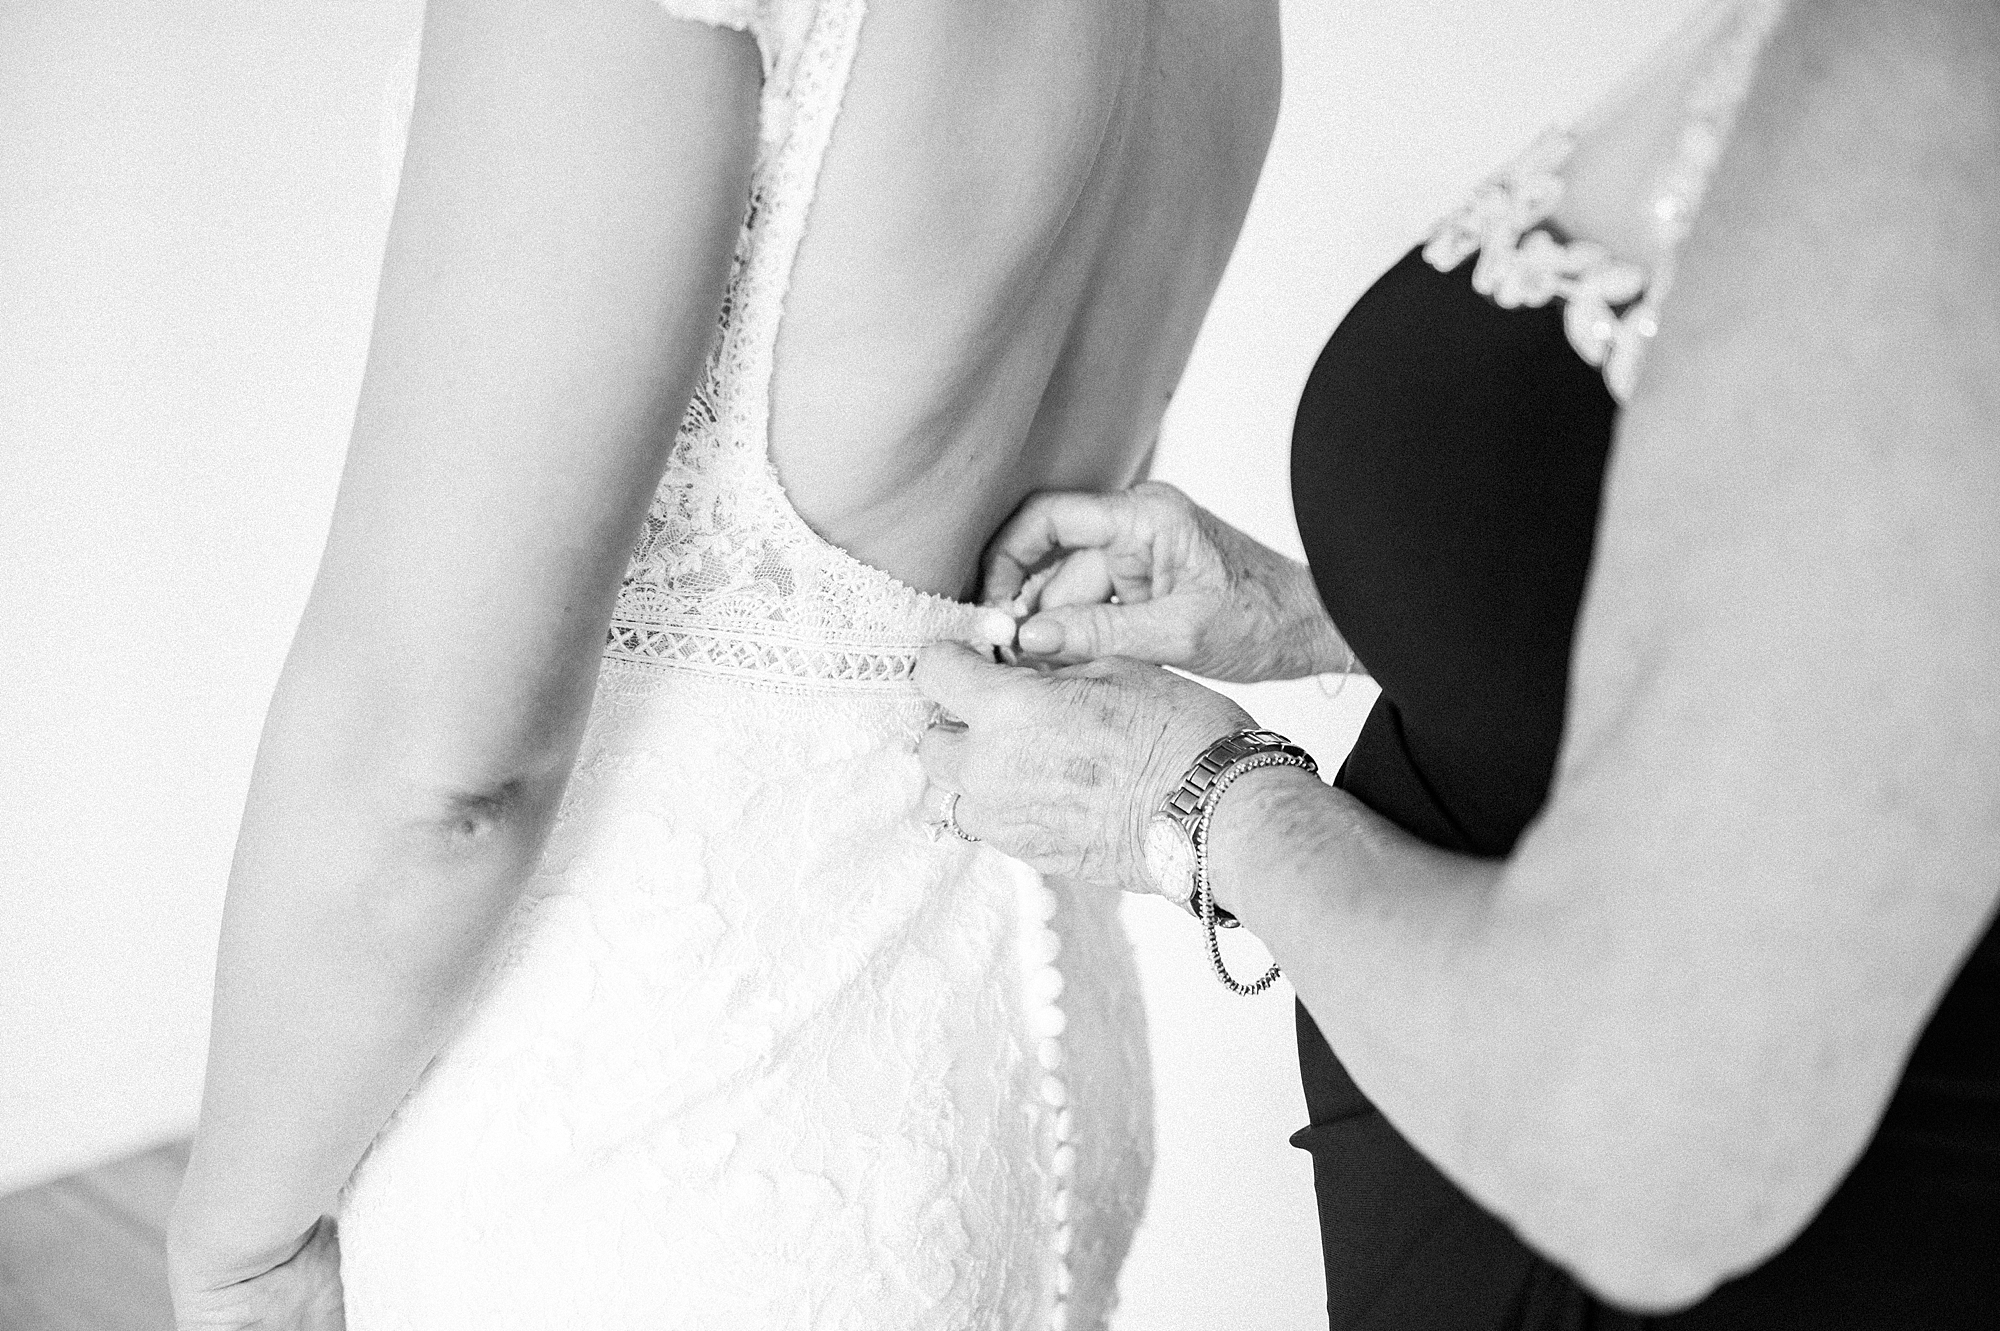 mother of the bride helping bride into dress